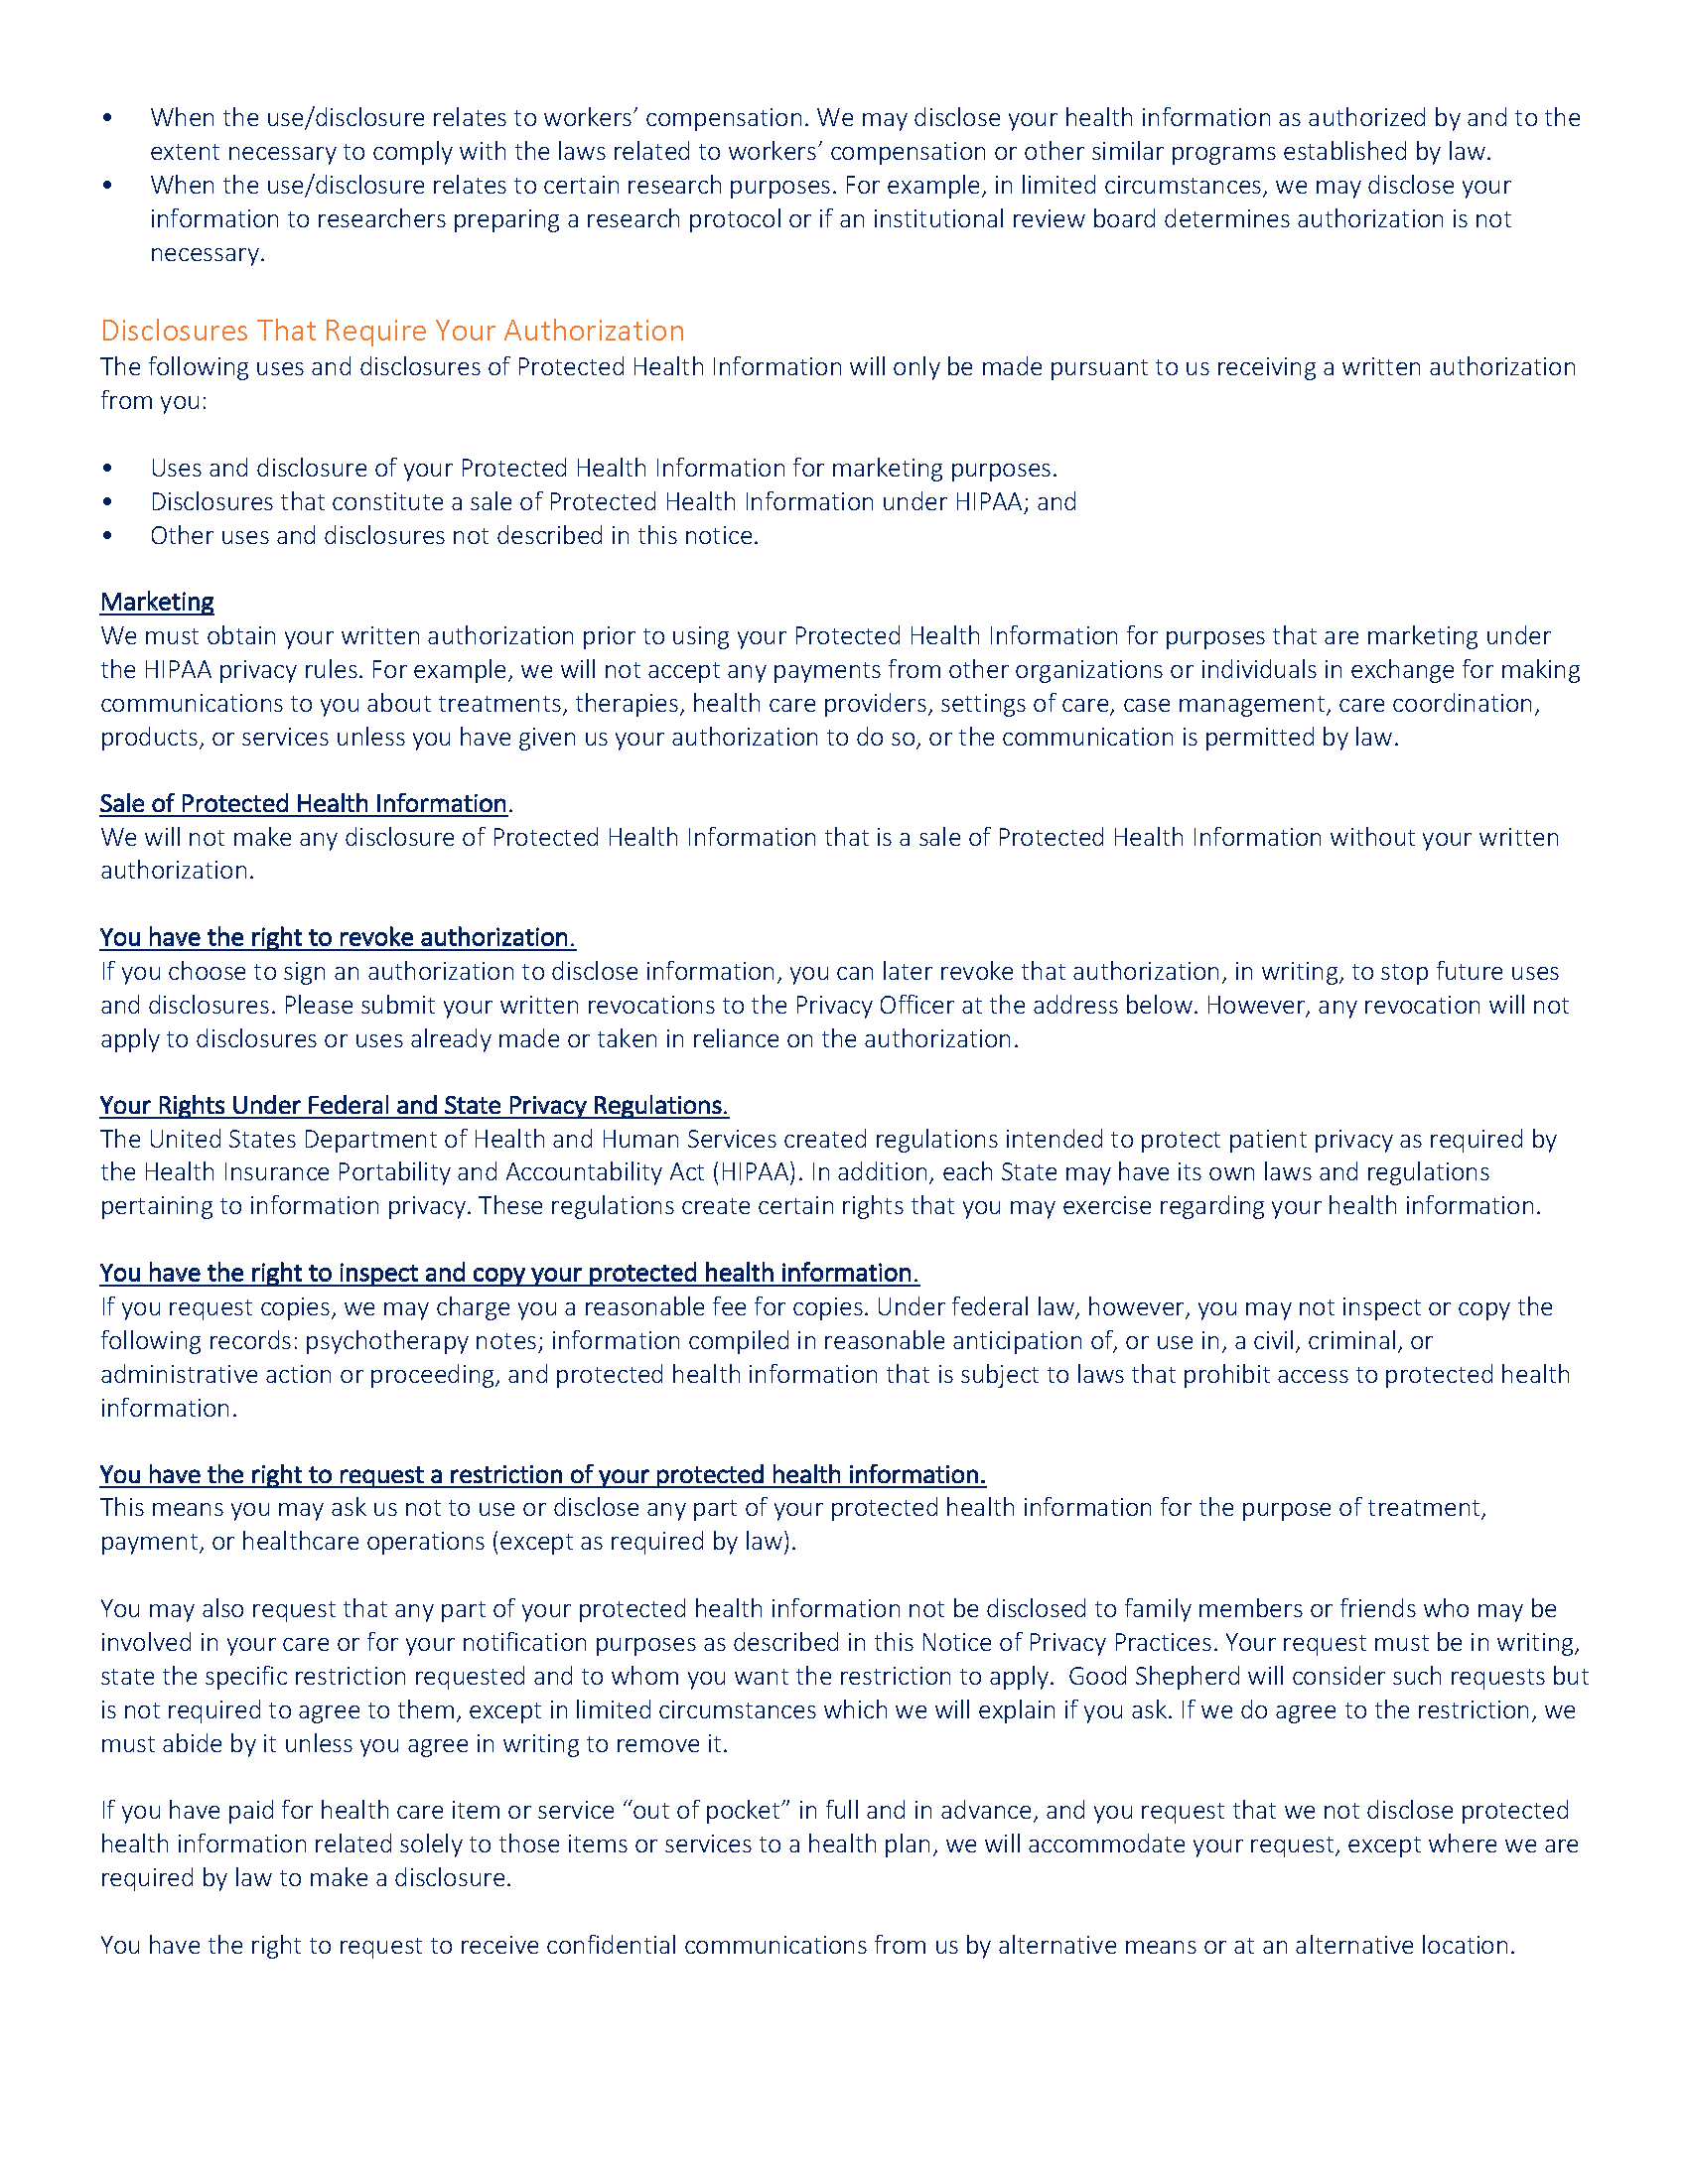 Patient Handbook 10.23 (English)_Page_10.png